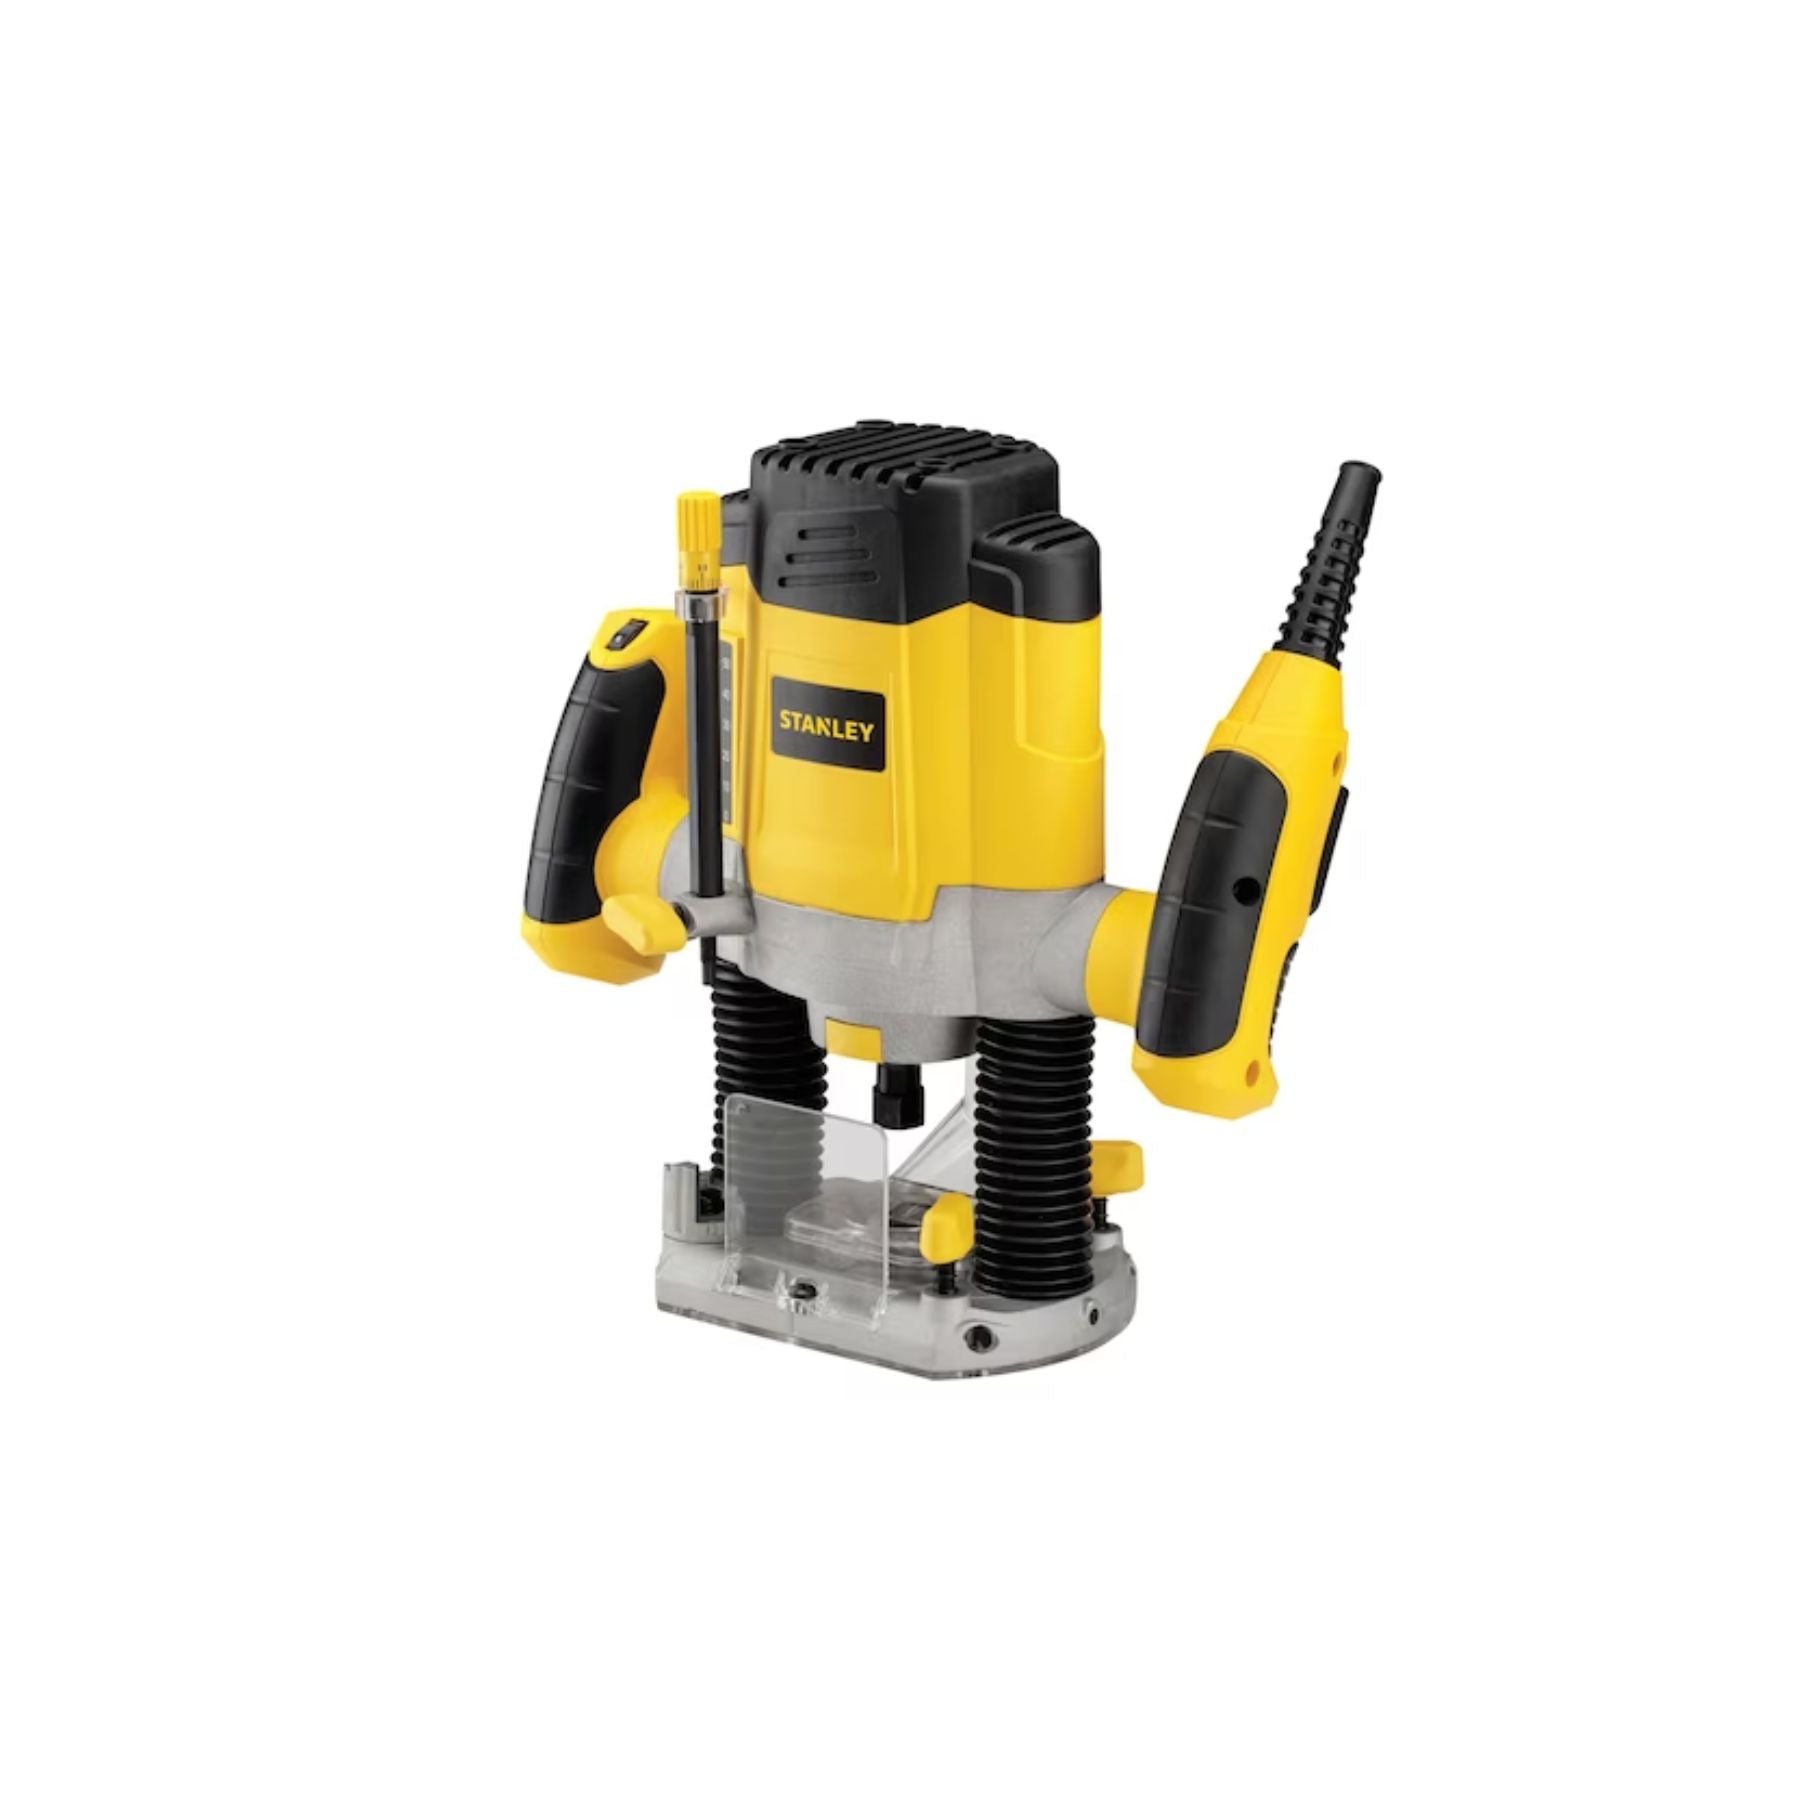 Stanley (SRR1200-IN) 1200W Variable Speed Plunge Router